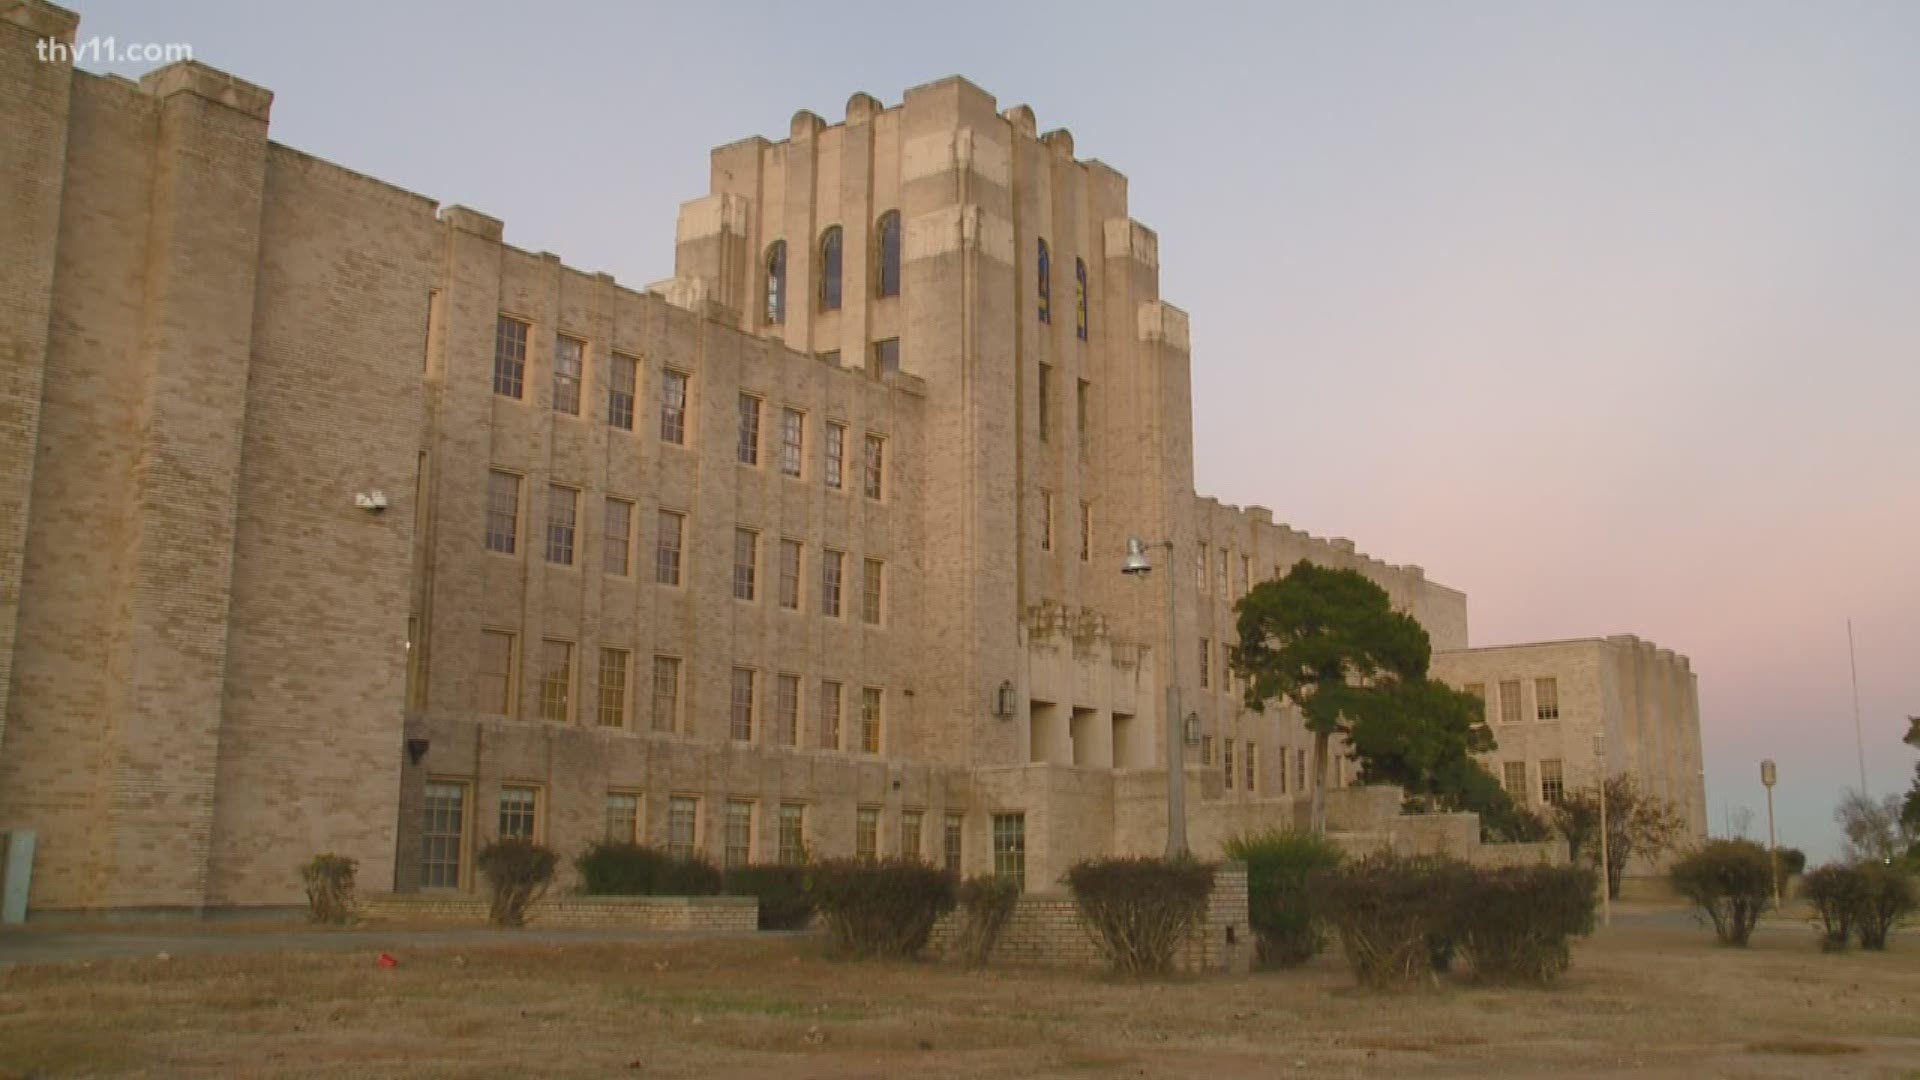 In North Little Rock, the 'Ole Main' high school has an uncertain future.